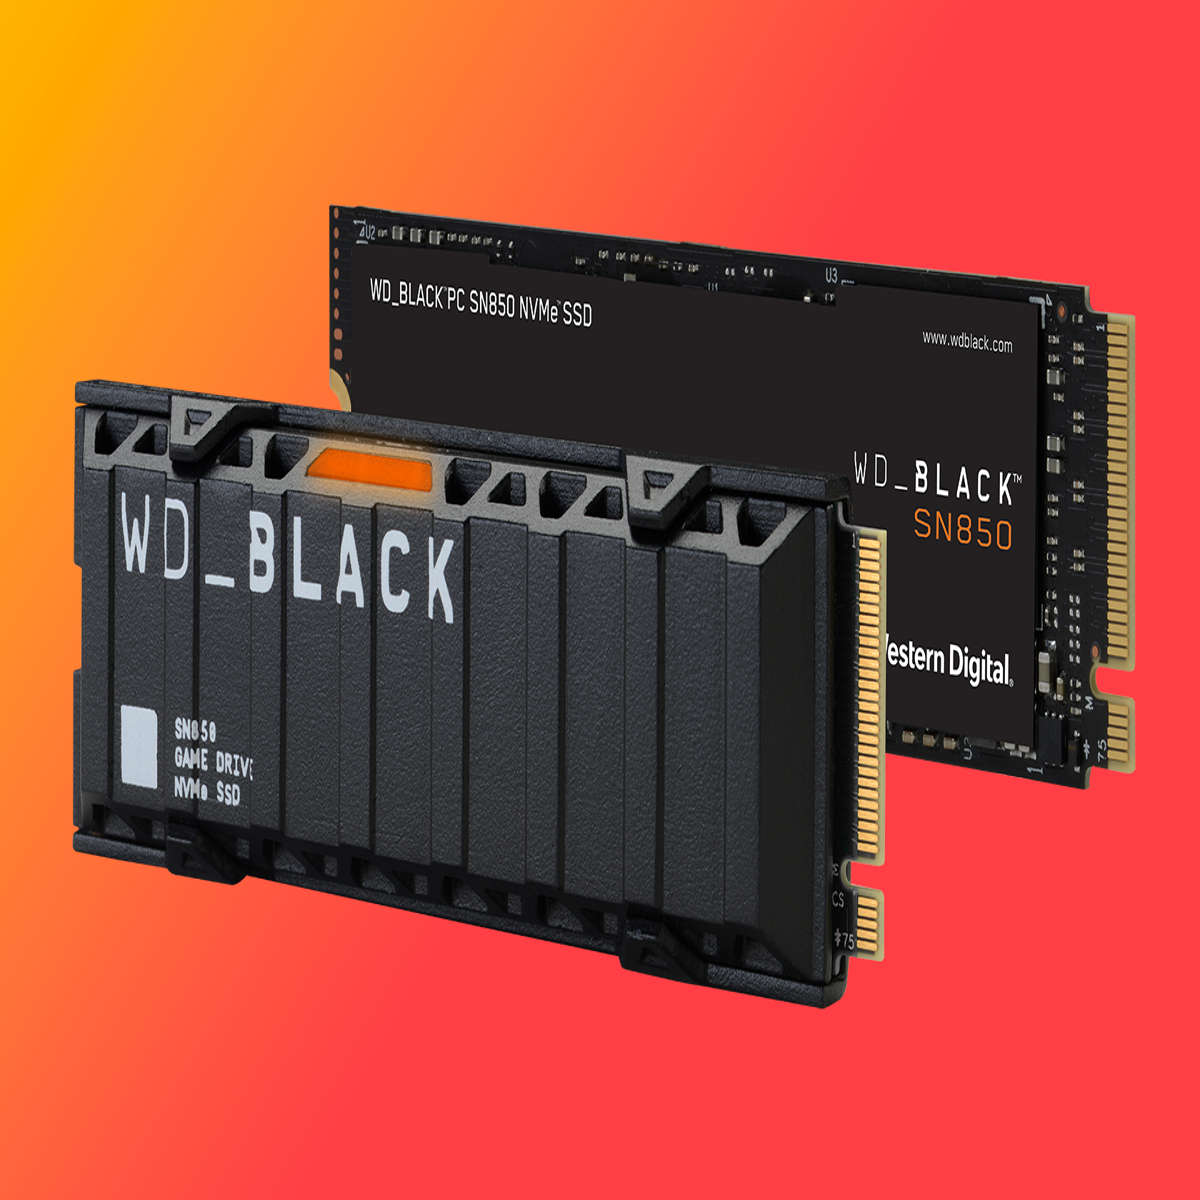 WD Black SN850 SSD review: High performance and speedy load times